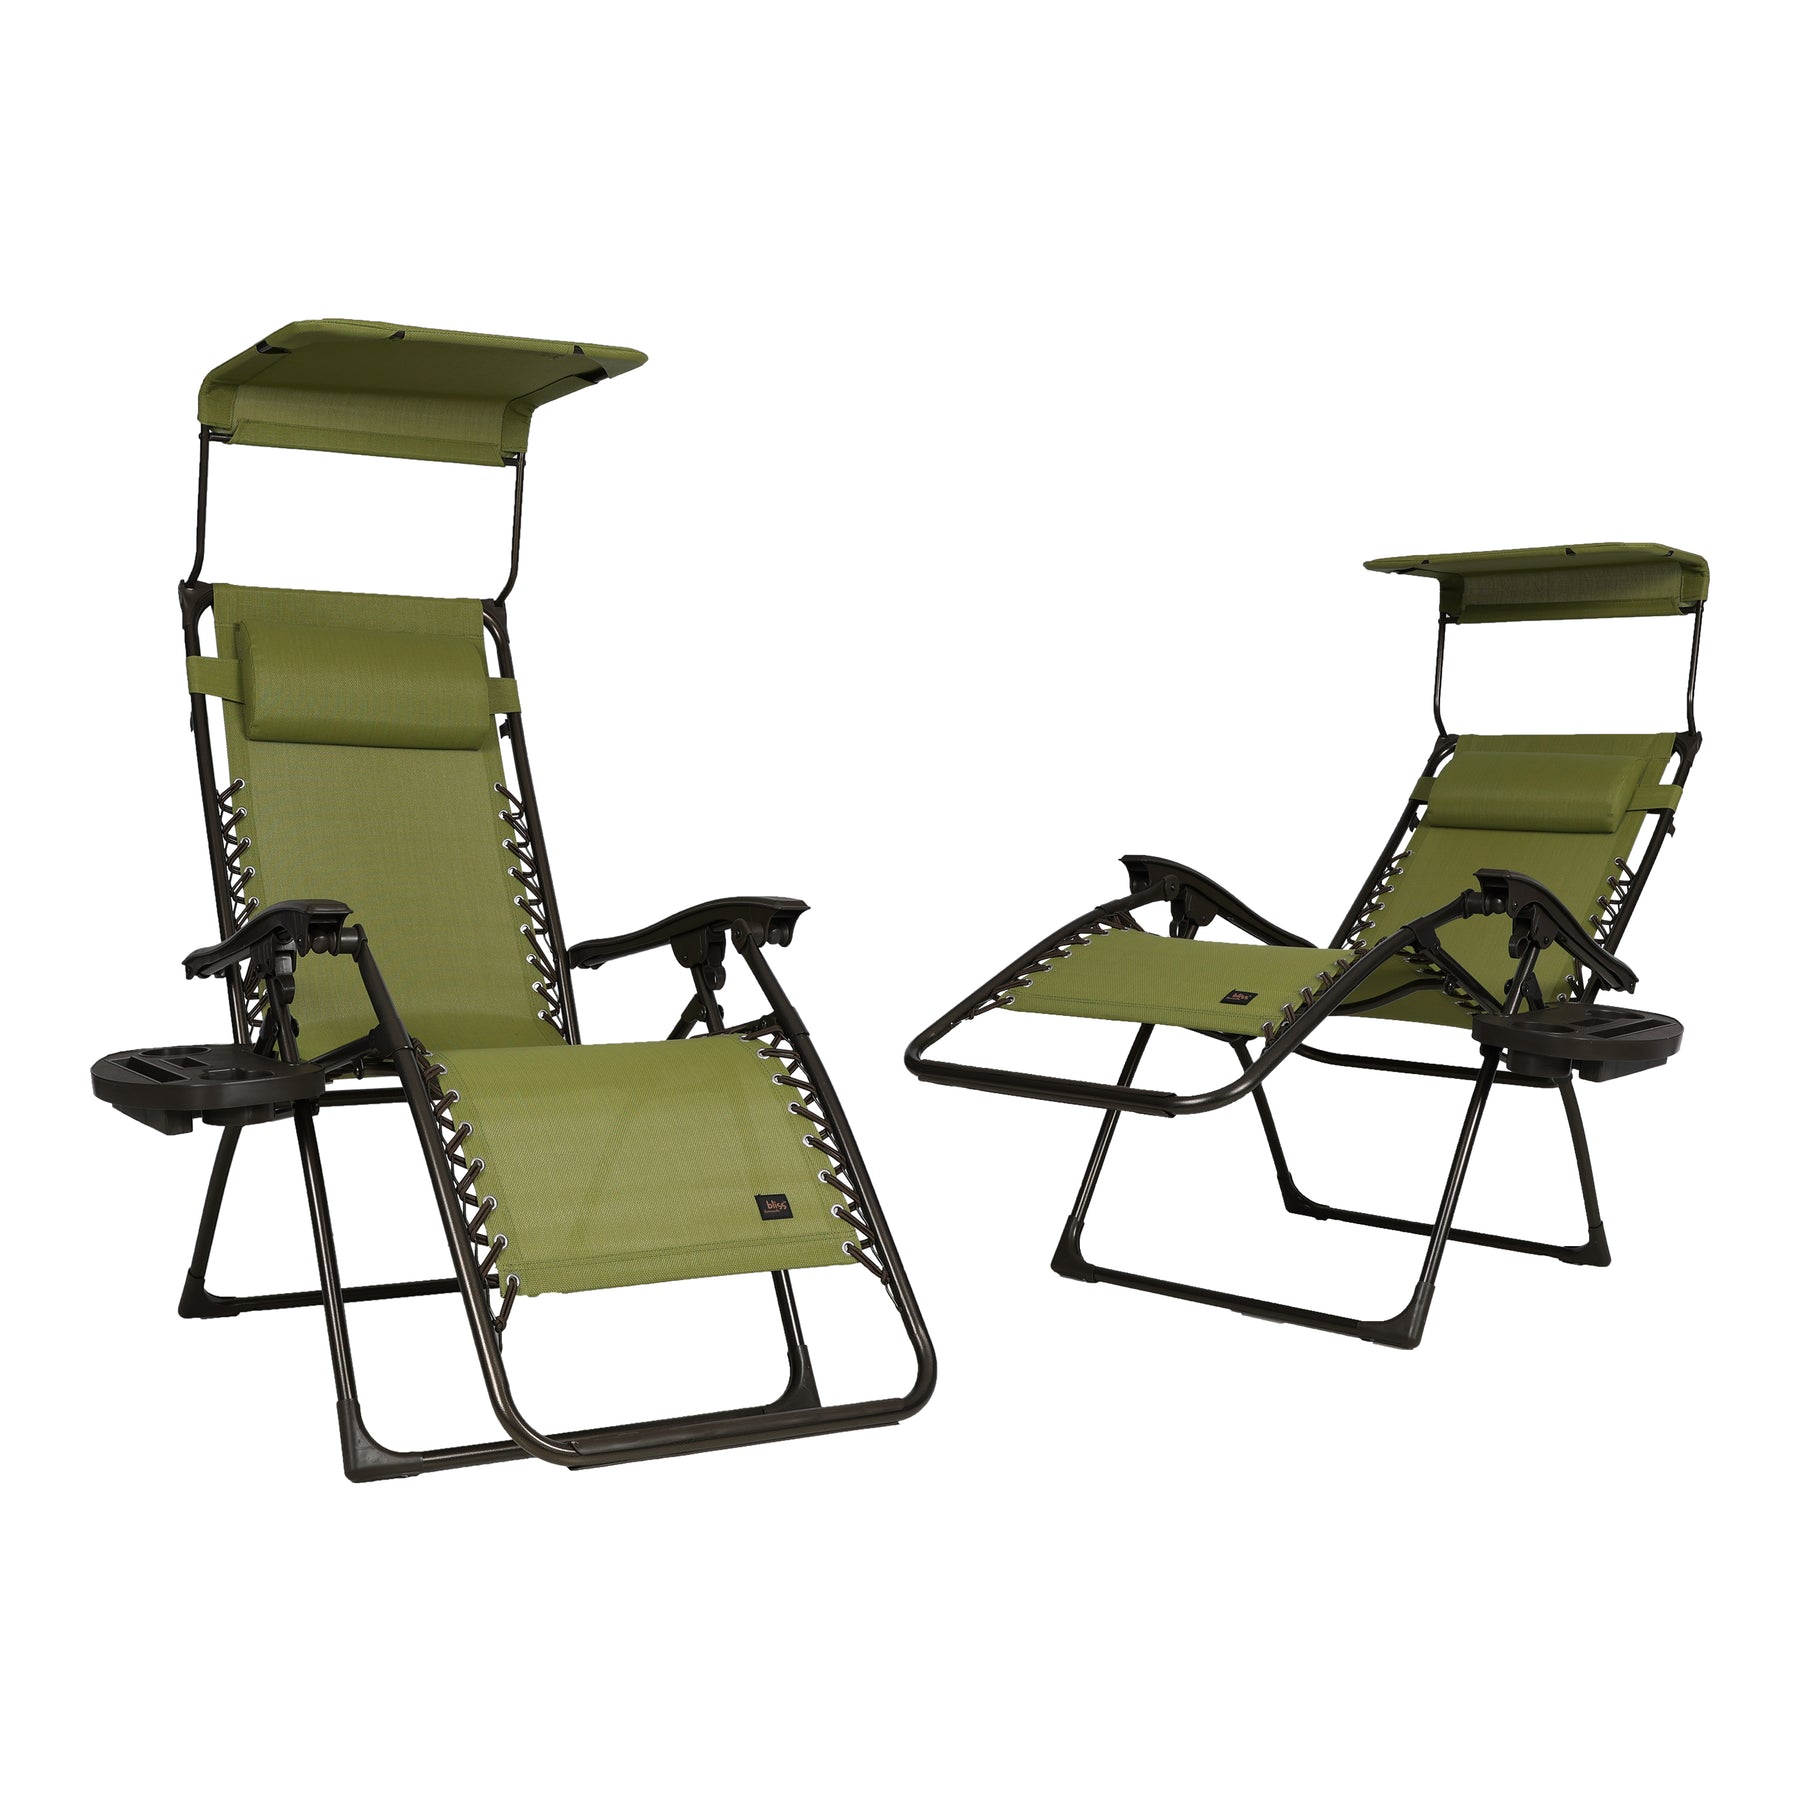 Bliss Hammocks Set of 2 26-inch Zero Gravity Chairs with Adjustable Canopy Sun-Shade, Drink Tray, and Pillow. Sage Green variation is a solid sage green color.